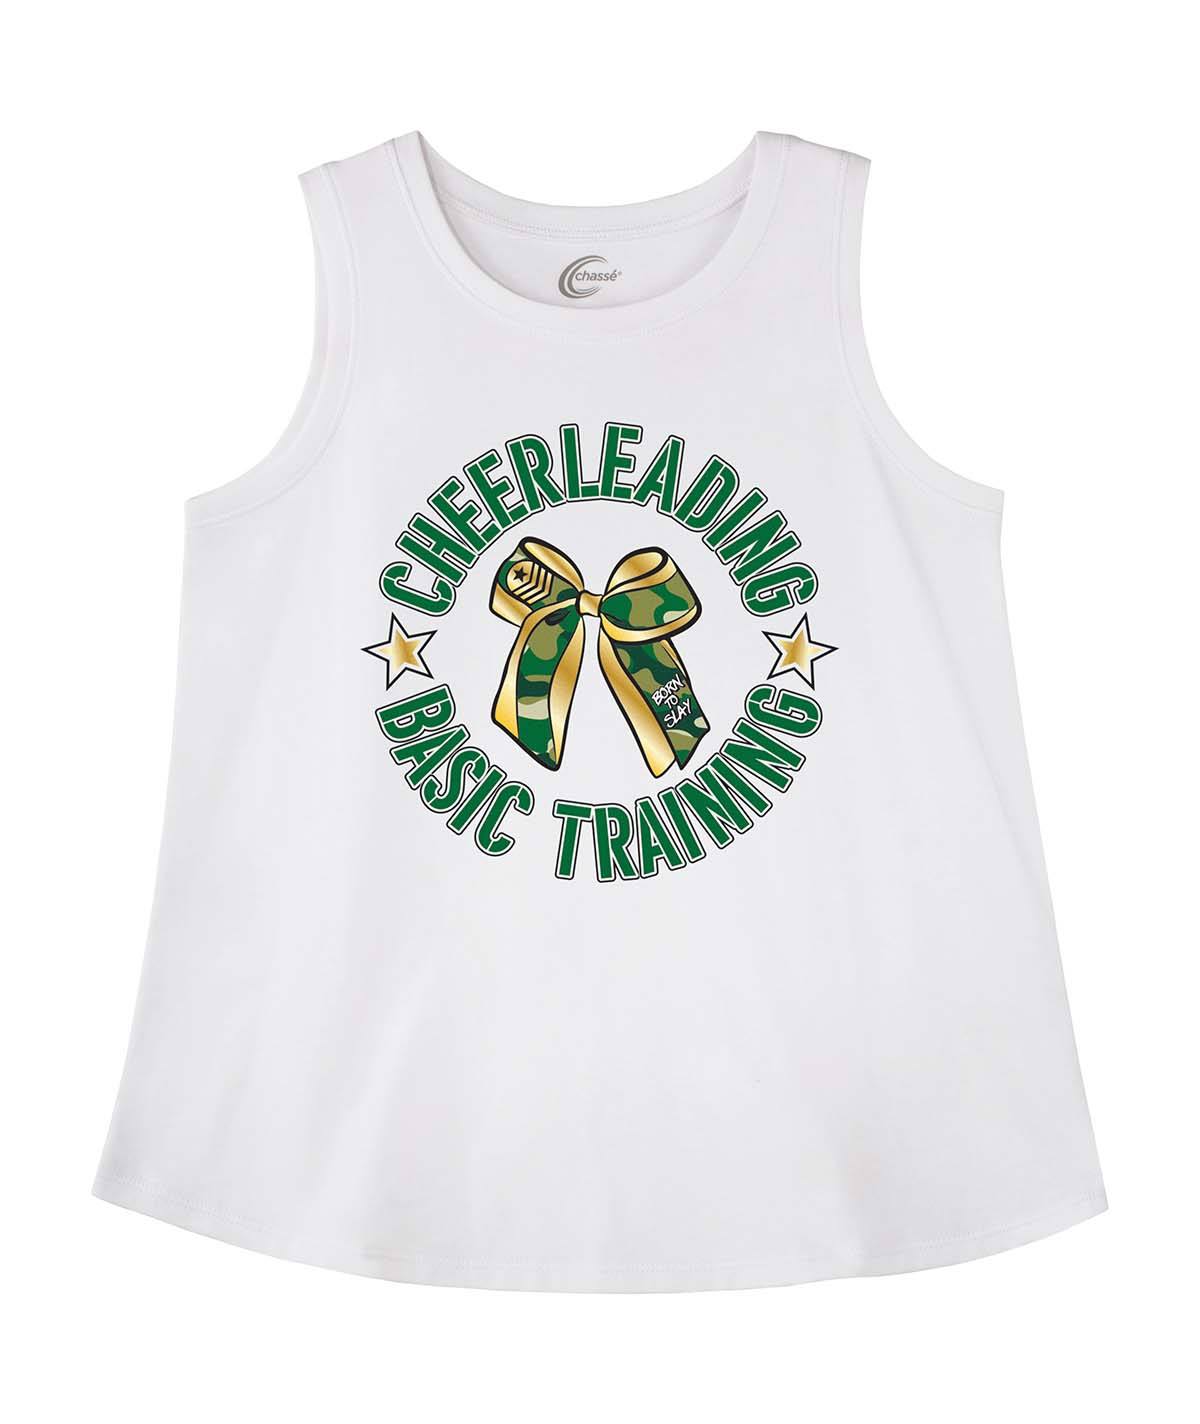 Chasse Cheer Boot Camp Tank